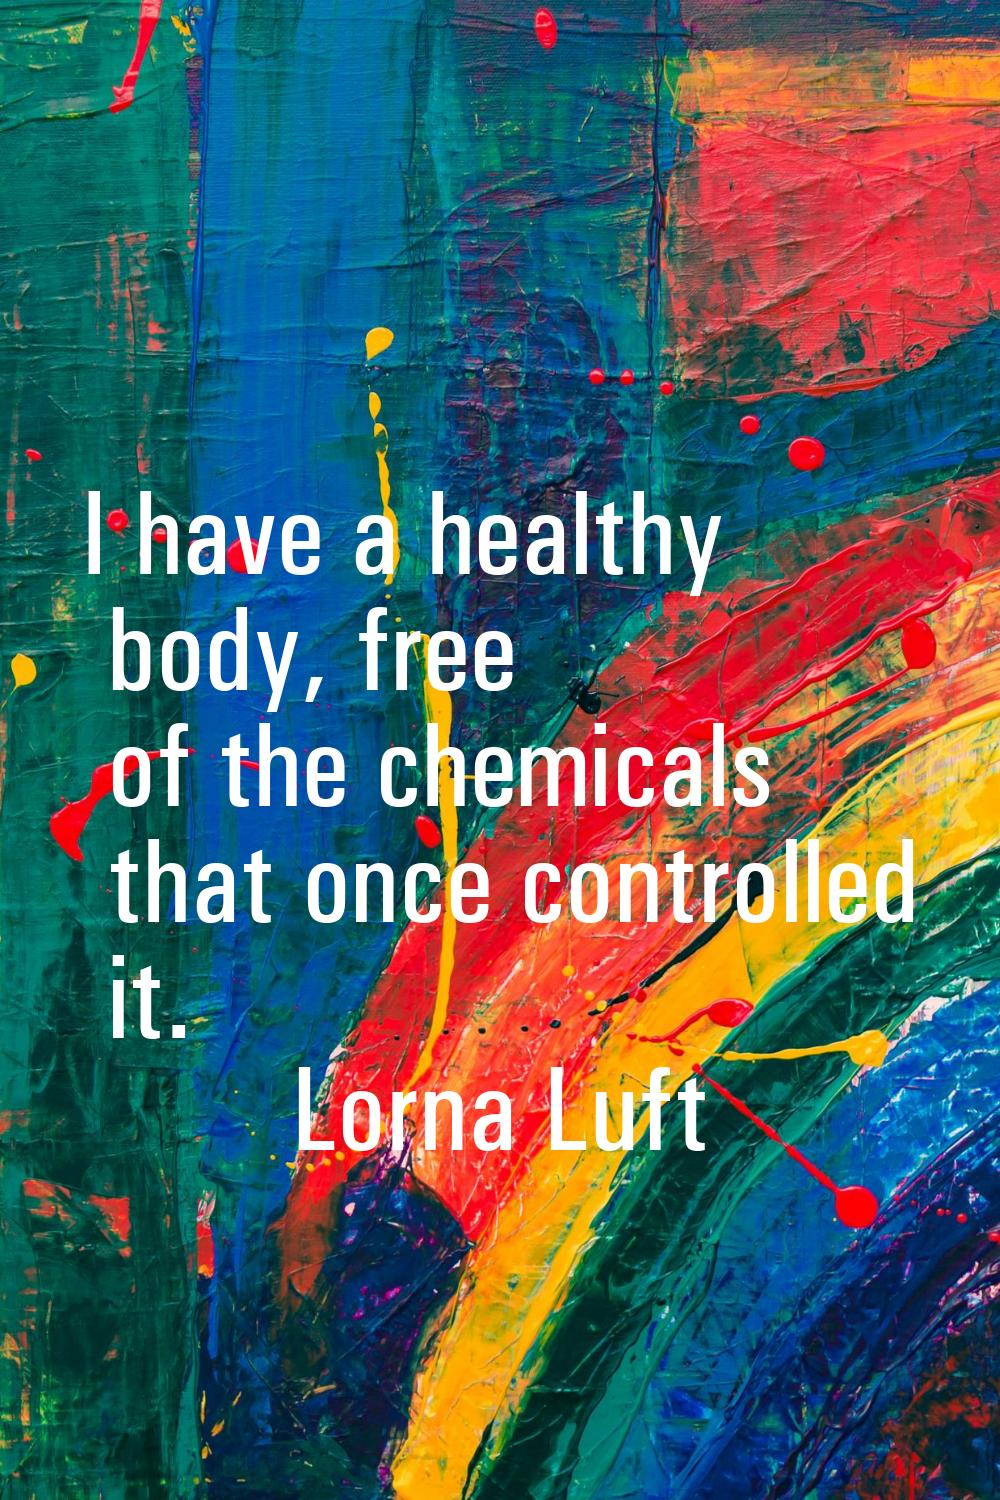 I have a healthy body, free of the chemicals that once controlled it.